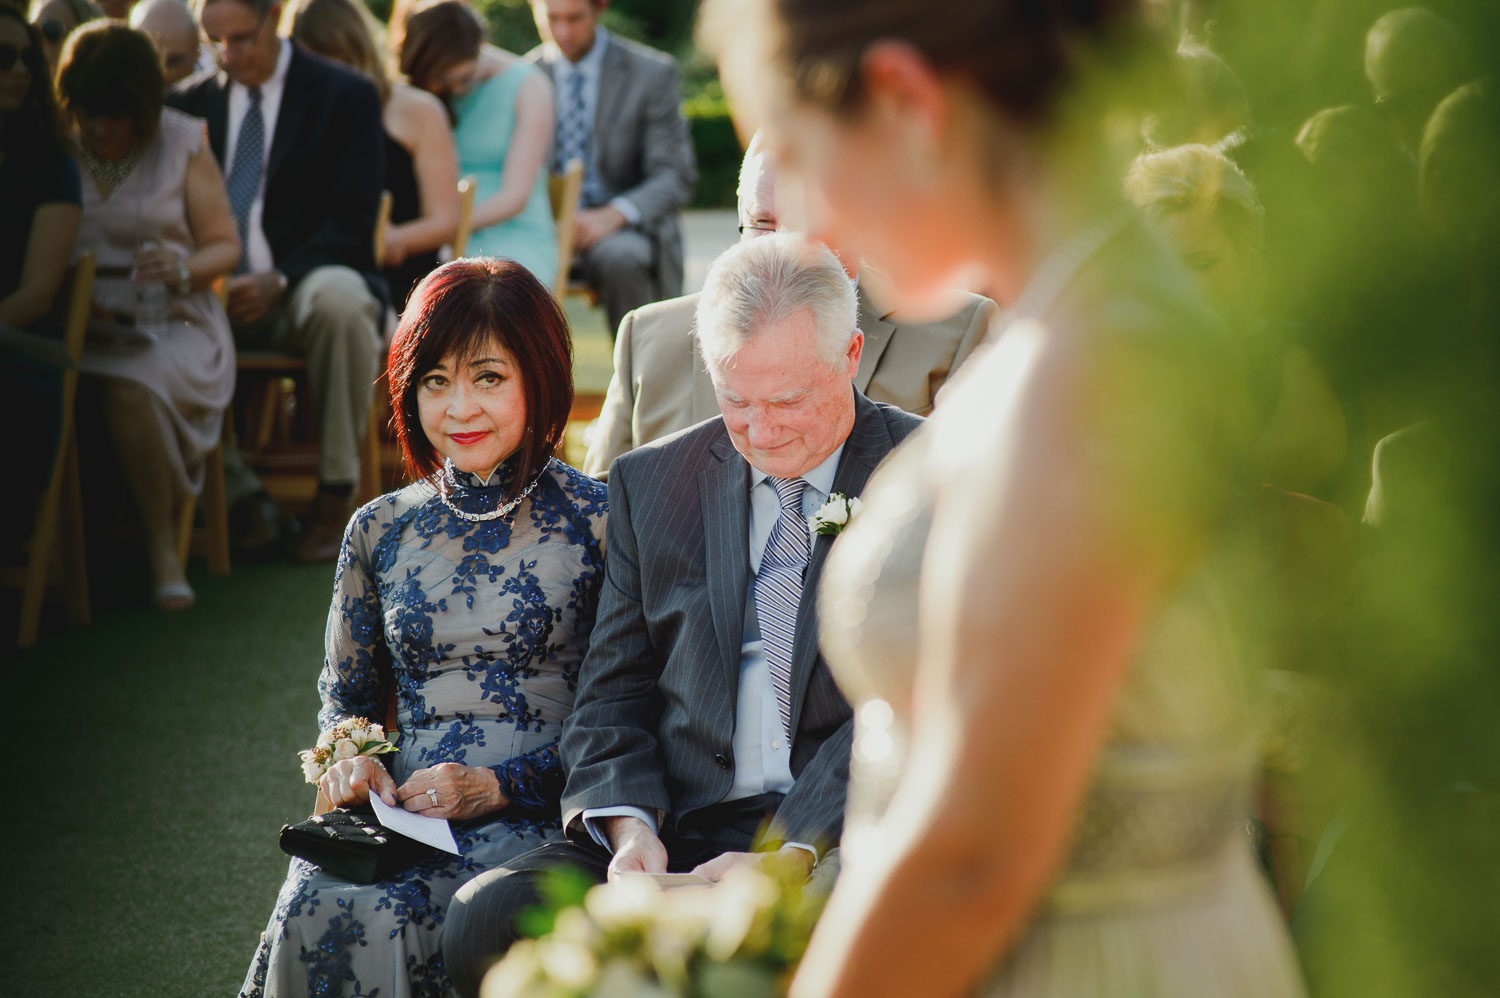 Mother and father watch their daughter marry during ceremony at Cherie Flores Garden Pavilion Wedding Hermann Park Houston Texas-Philip Thomas